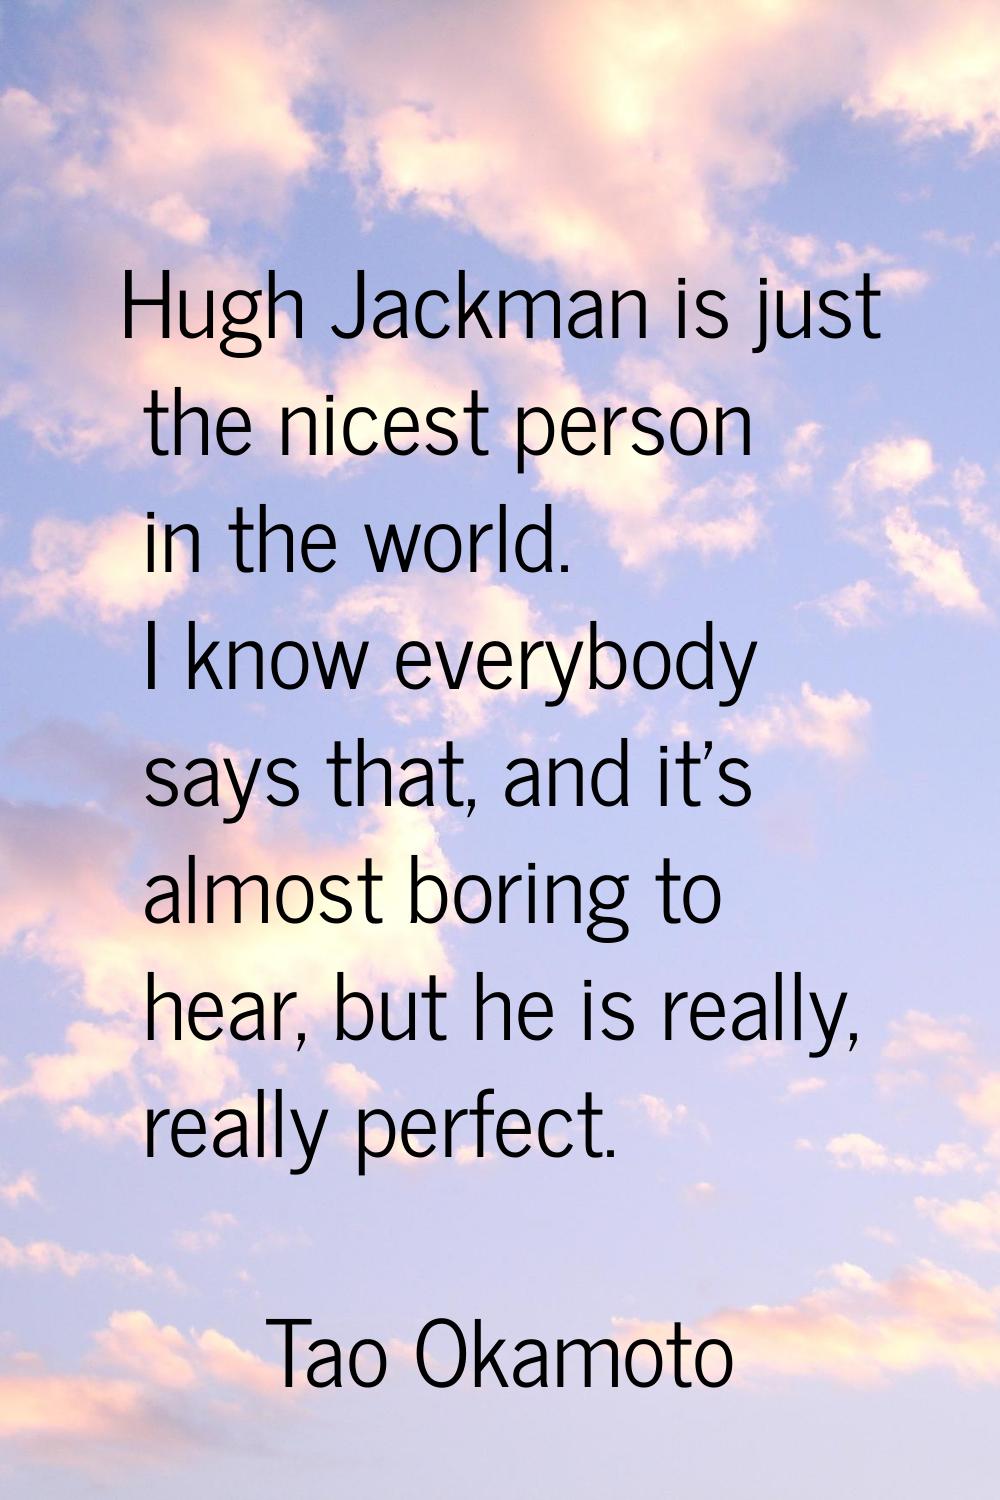 Hugh Jackman is just the nicest person in the world. I know everybody says that, and it's almost bo